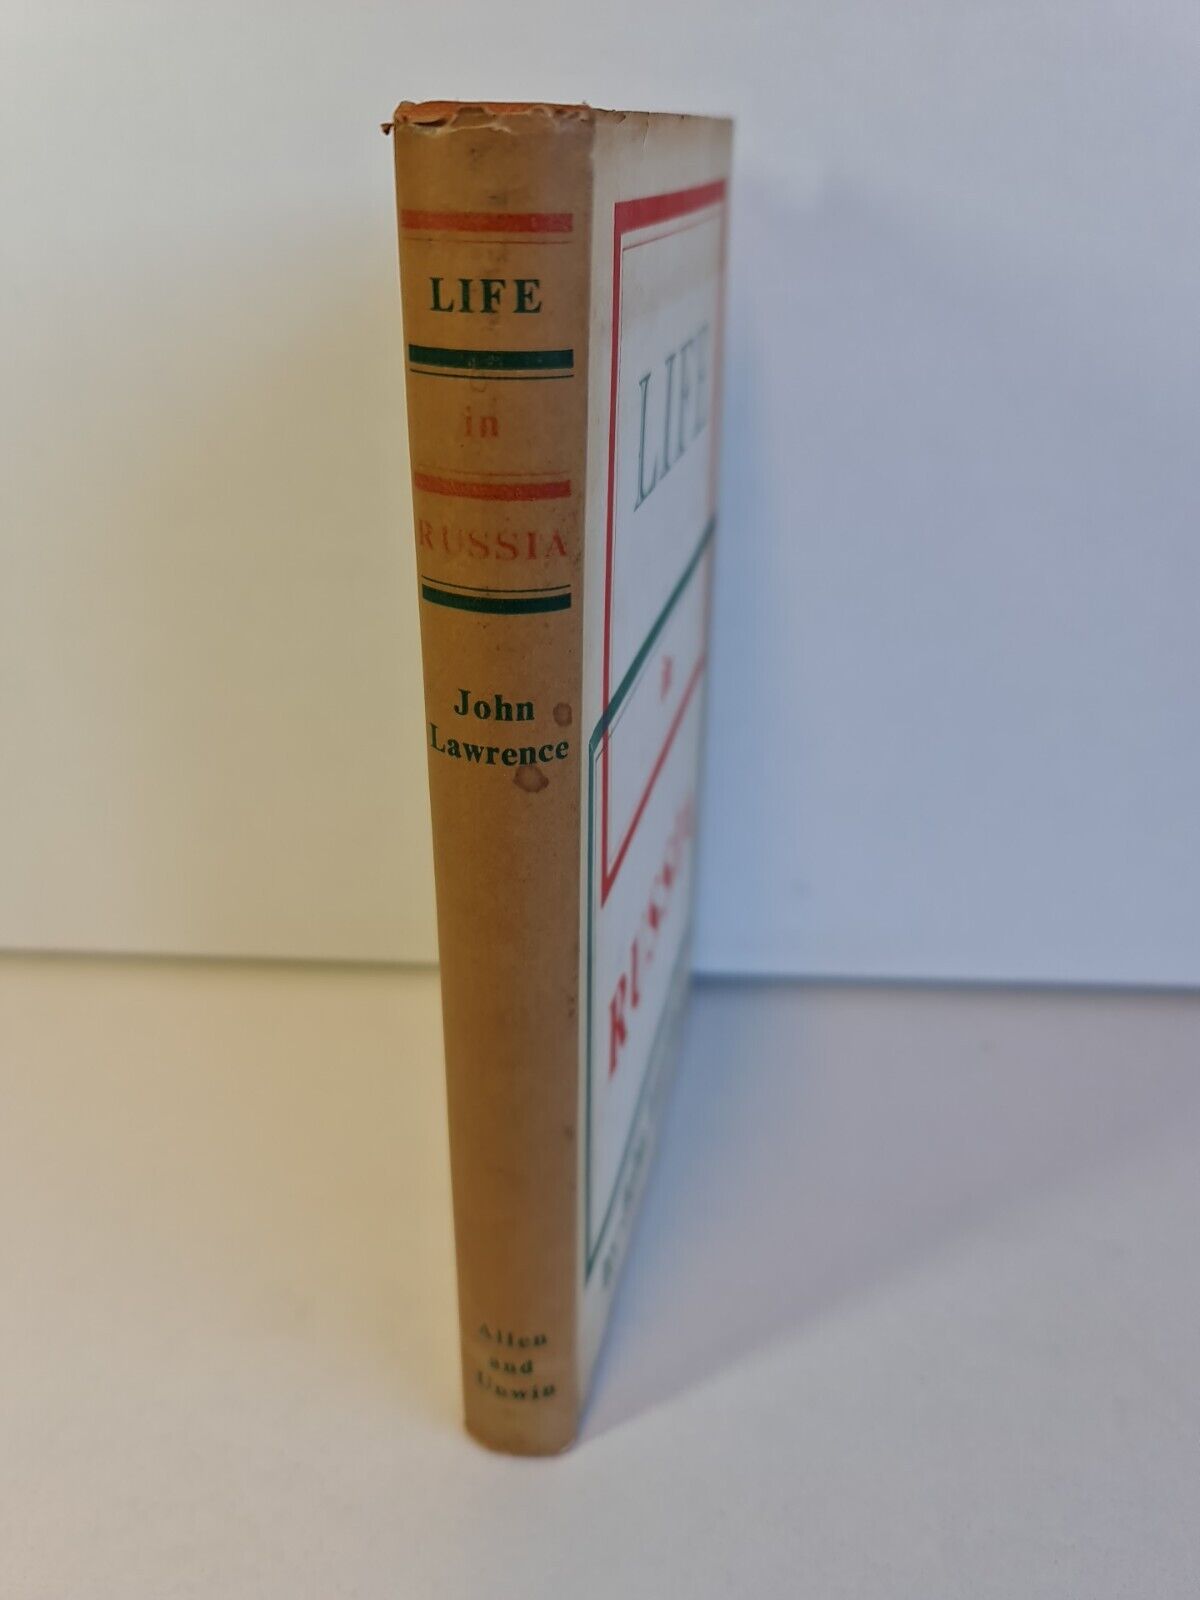 Life in Russia by John Lawrence (1948)